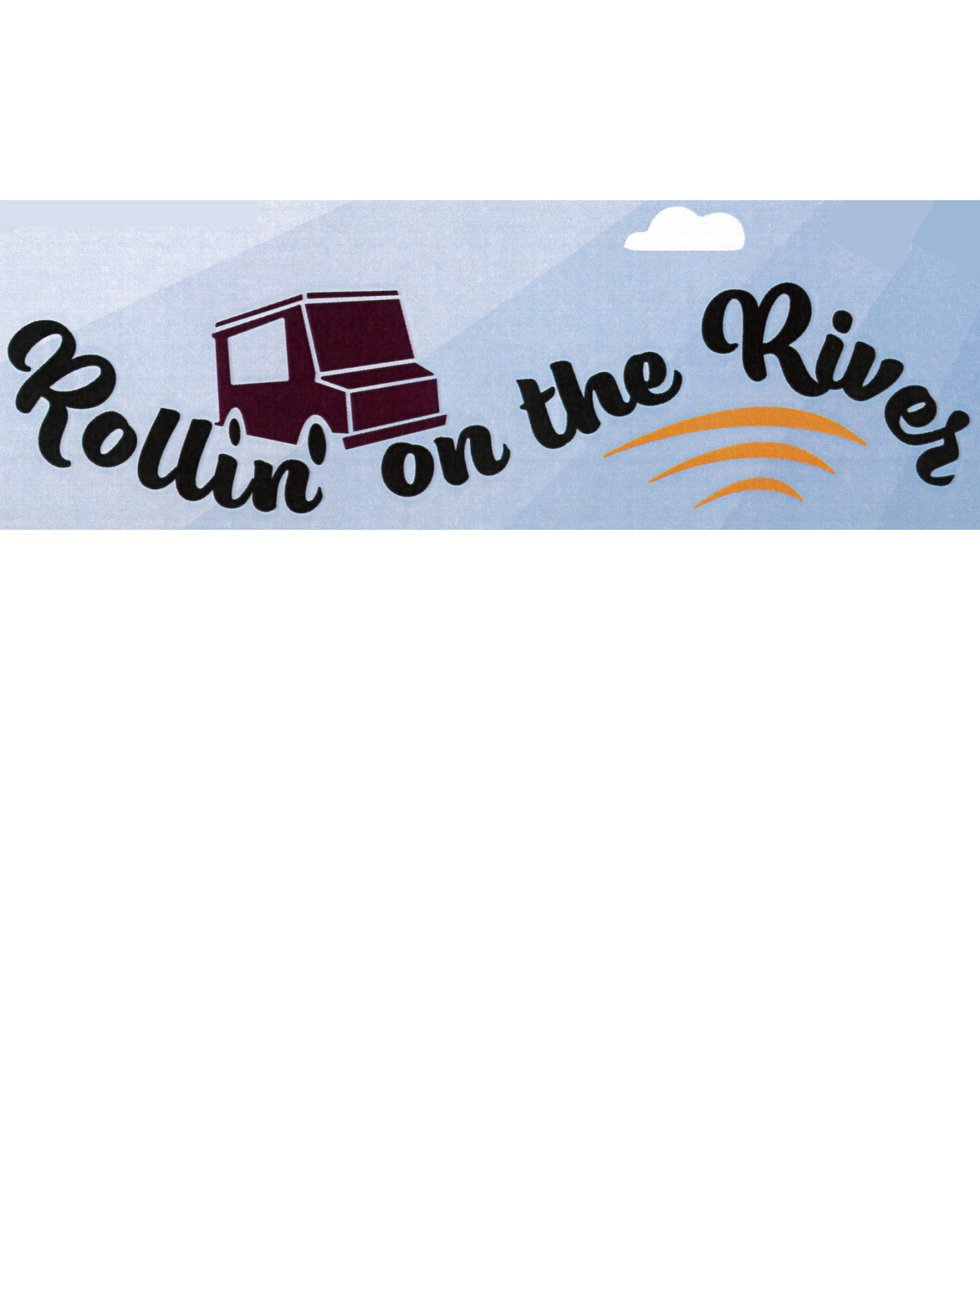 Rolllin-on-the-River-Logo-Cropped-to-Title-1536x2048.png